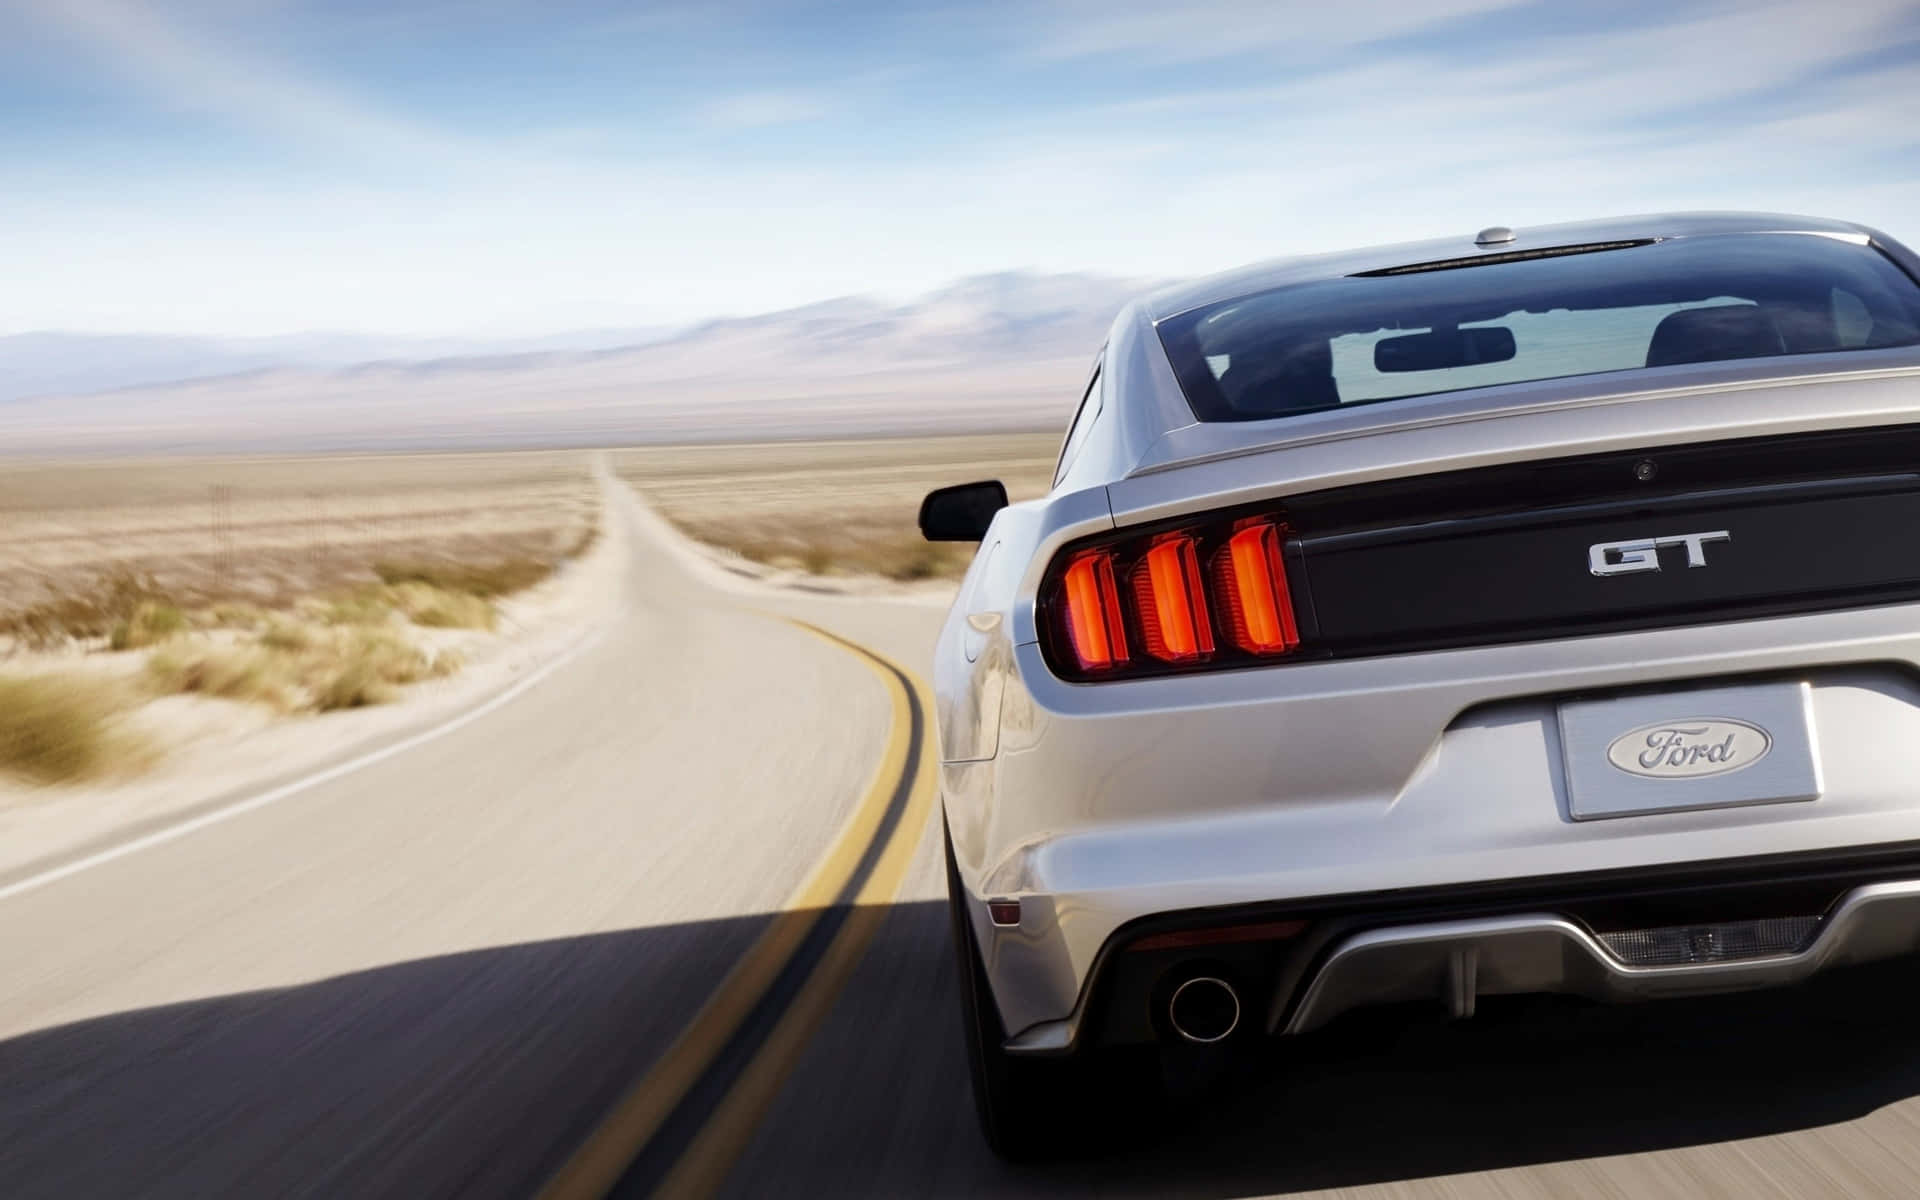 Caption: "2015 Ford Mustang GT Roaring Down the Highway" Wallpaper